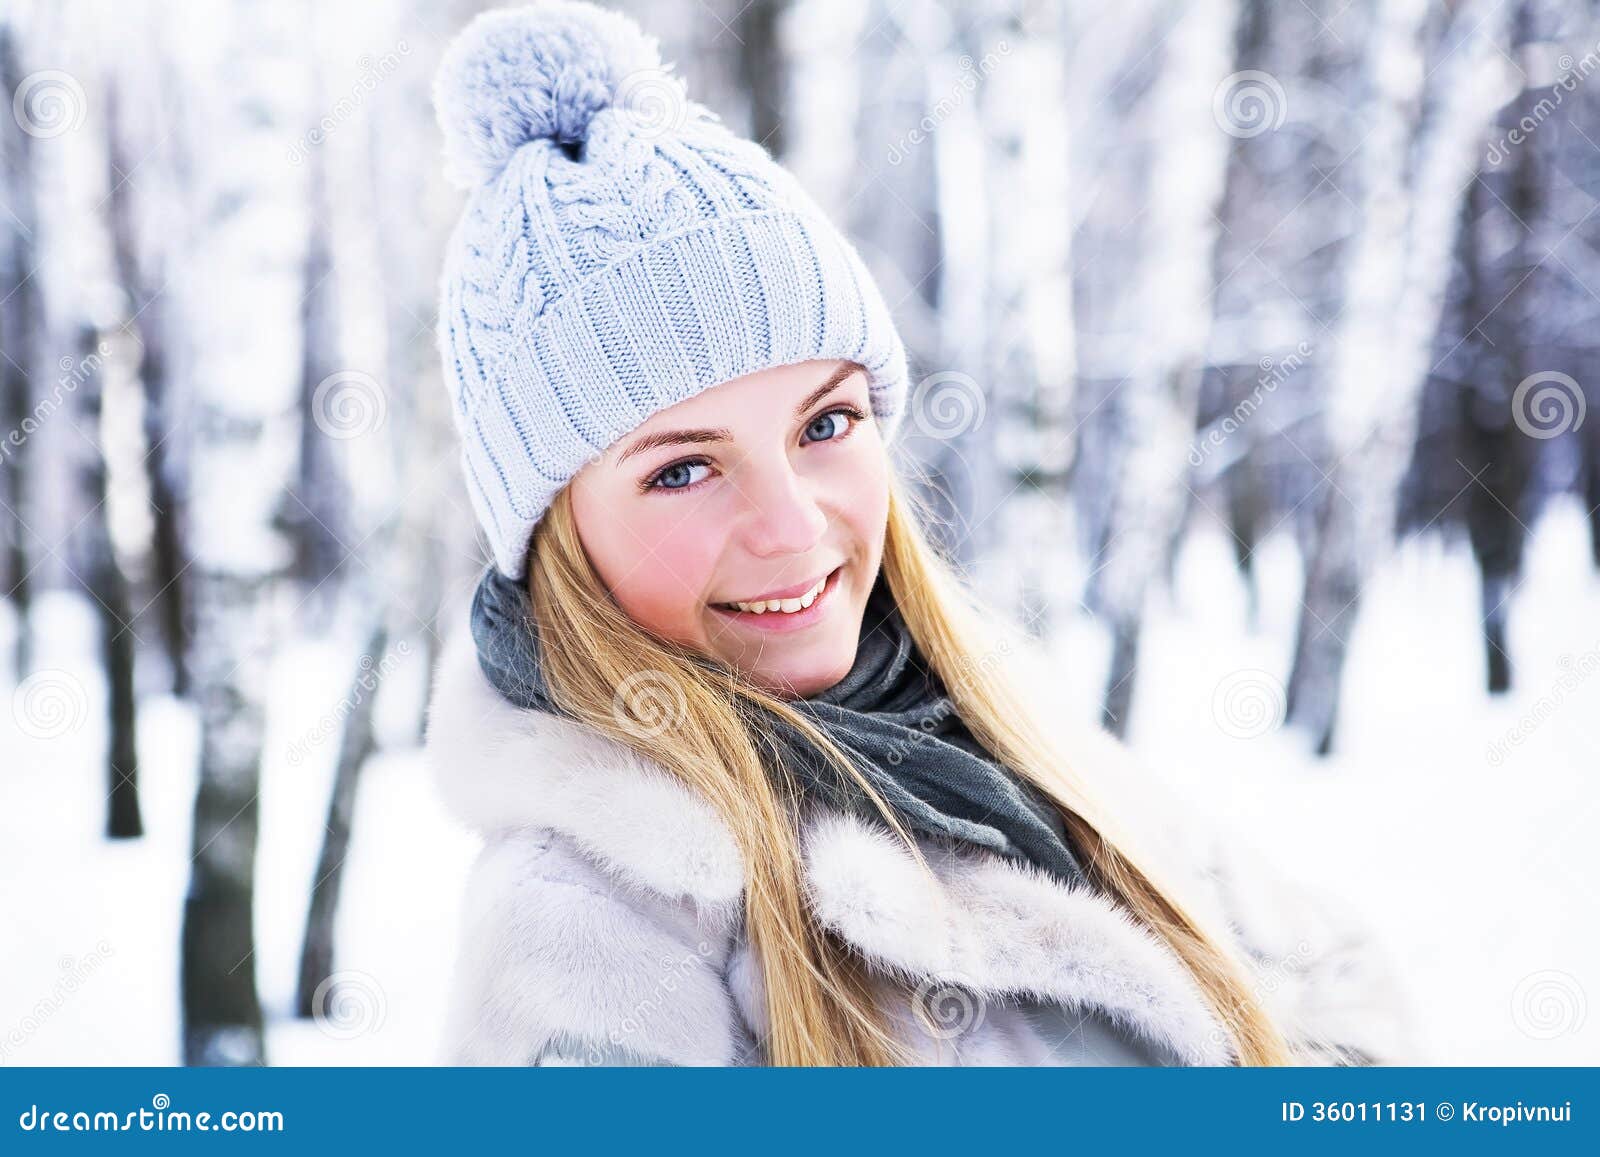 The Young, Beautiful Girl, Is Photographed In The Cold Winter In Park ...